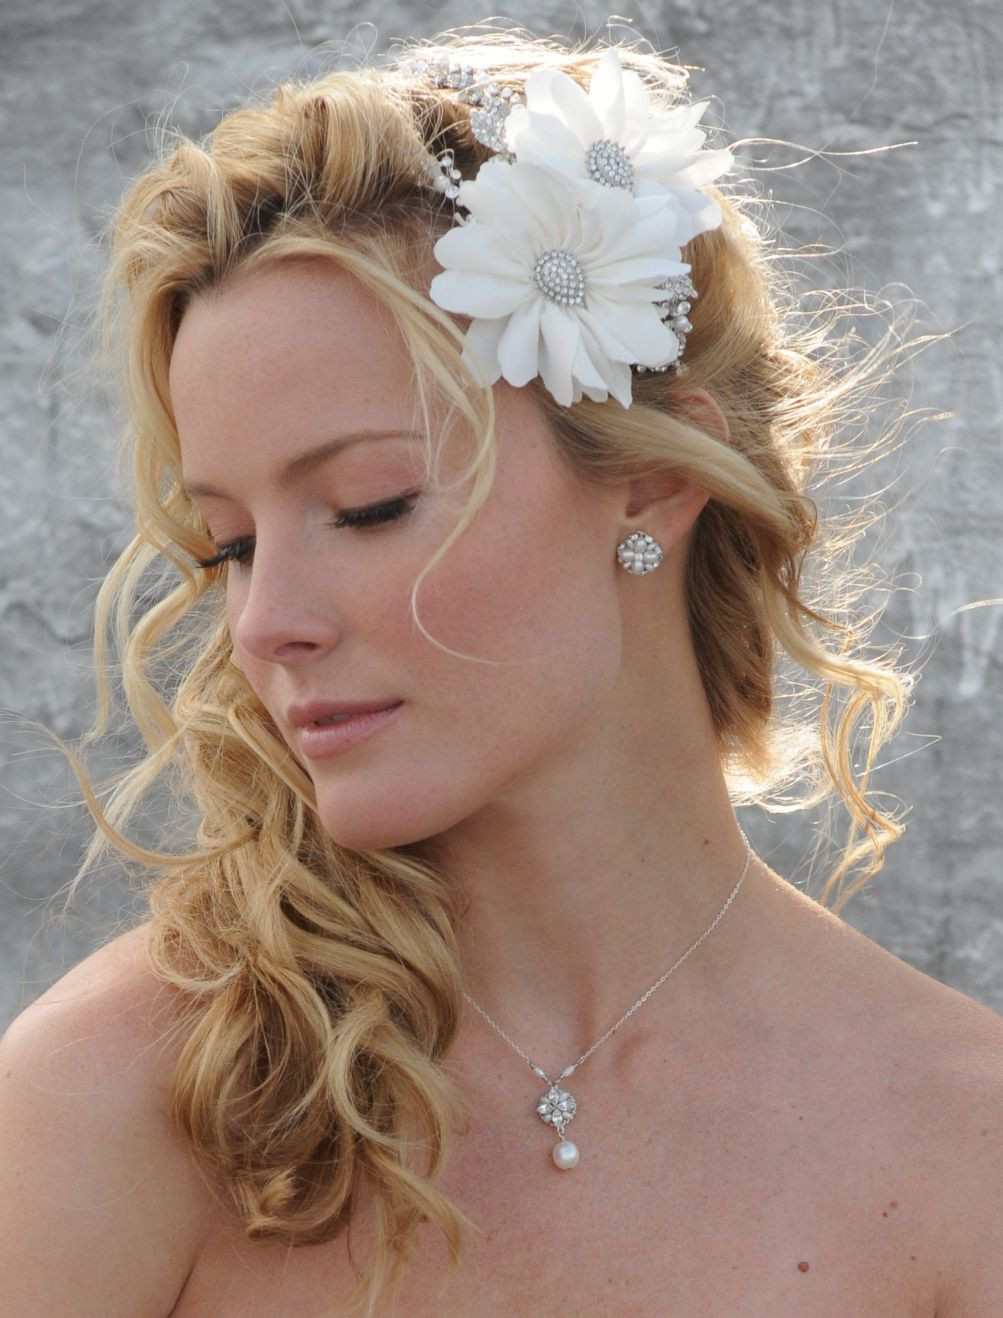 Side Ponytail Wedding Hairstyles
 Side Ponytail Wedding Hairstyle with Flowered Headband 05